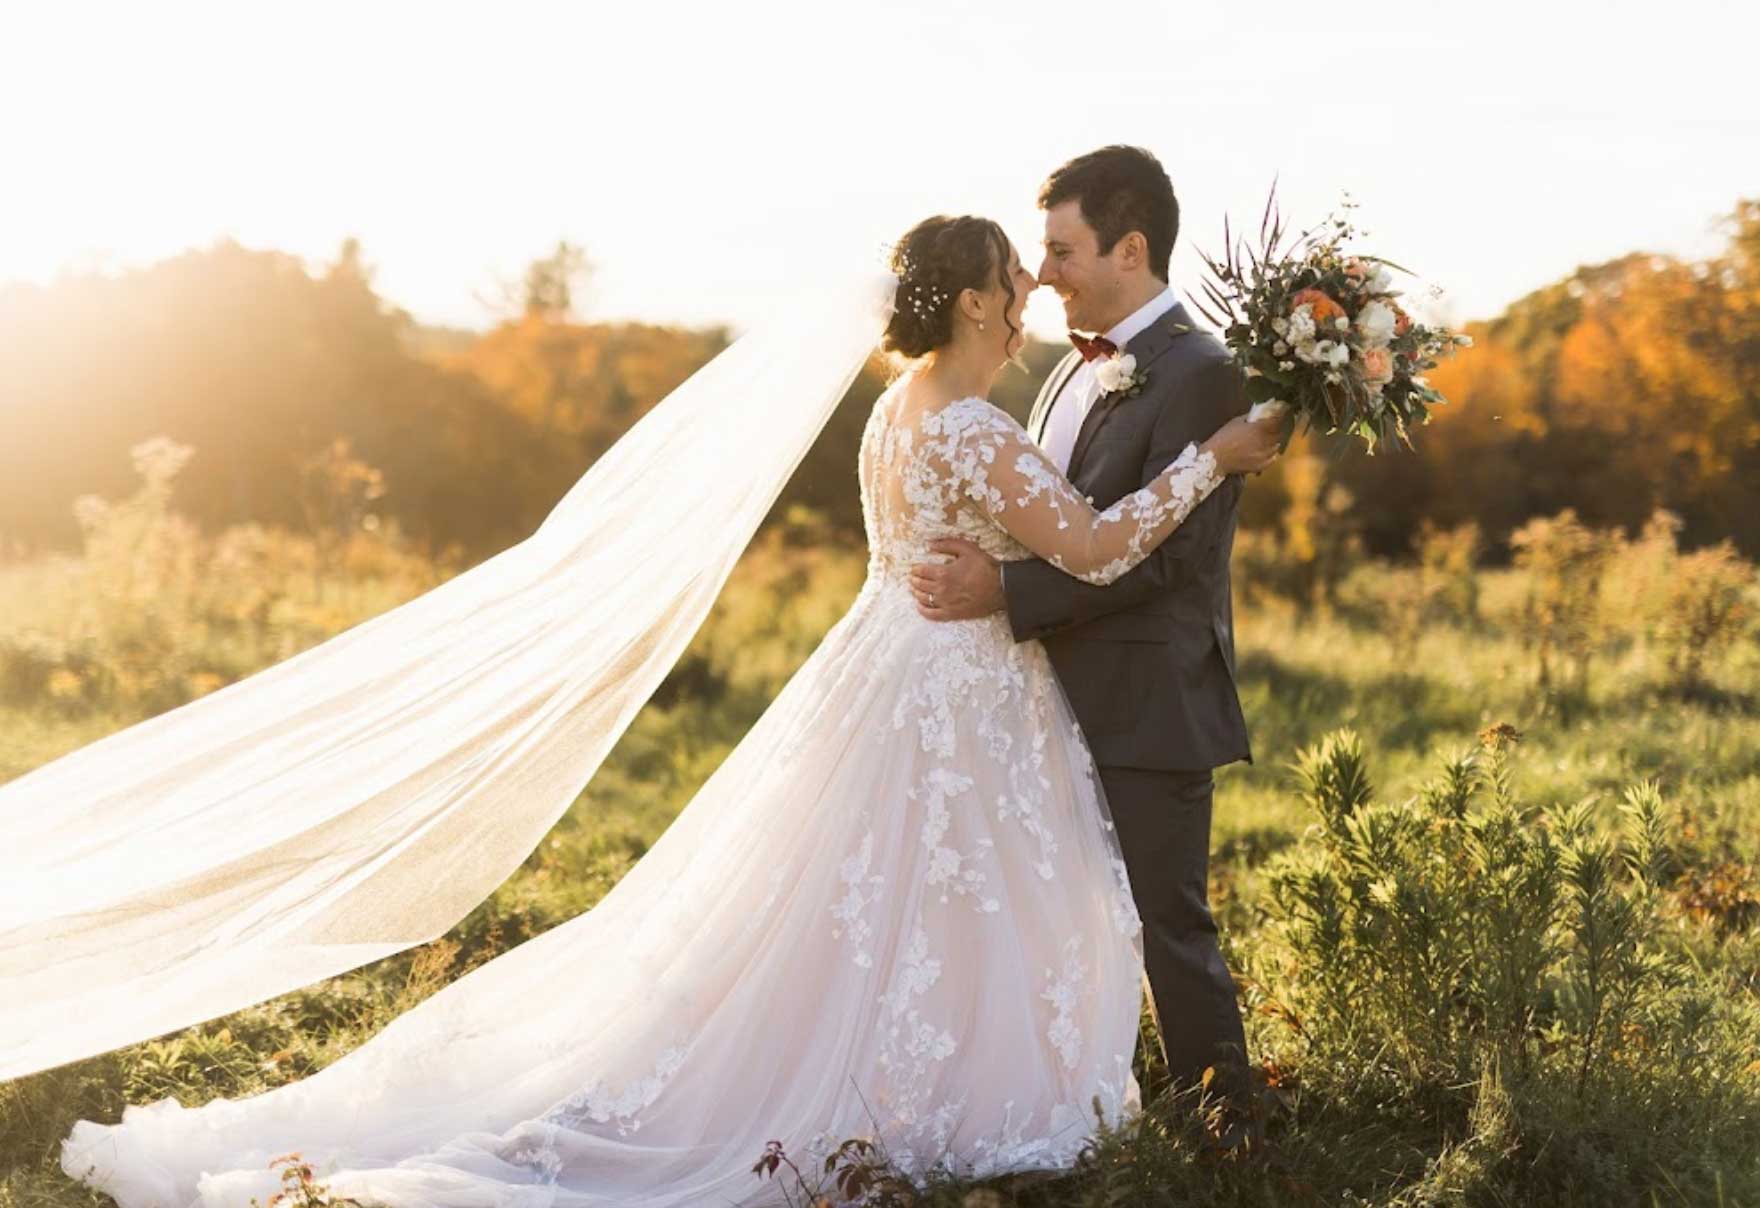 A bride and groom embrace in a field at sunset, capturing the essence of their special day.